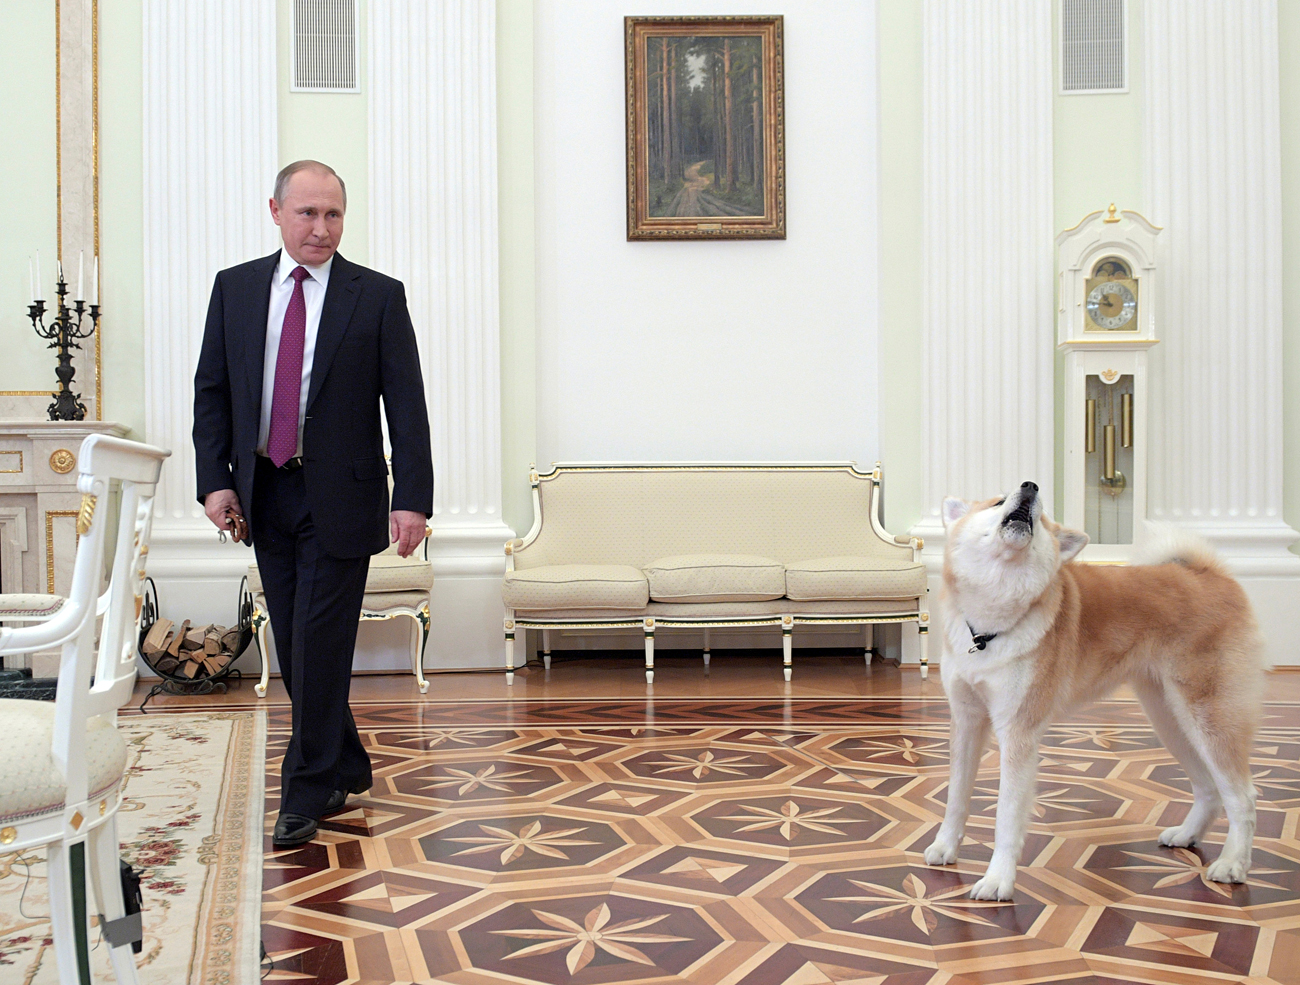 Russian President Vladimir Putin enters a hall with his dog Yume before giving an interview to journalists from Japan.